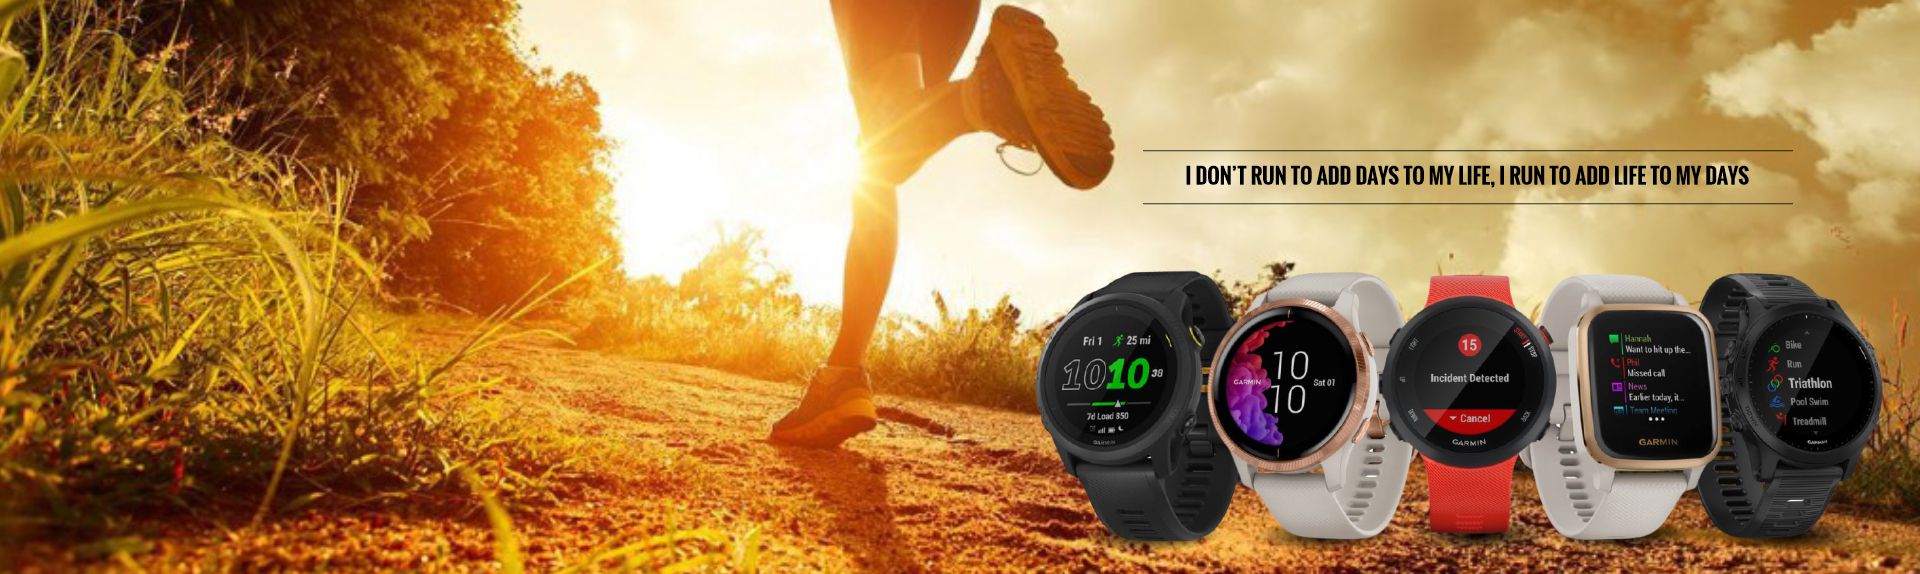 RUNING WATCHES